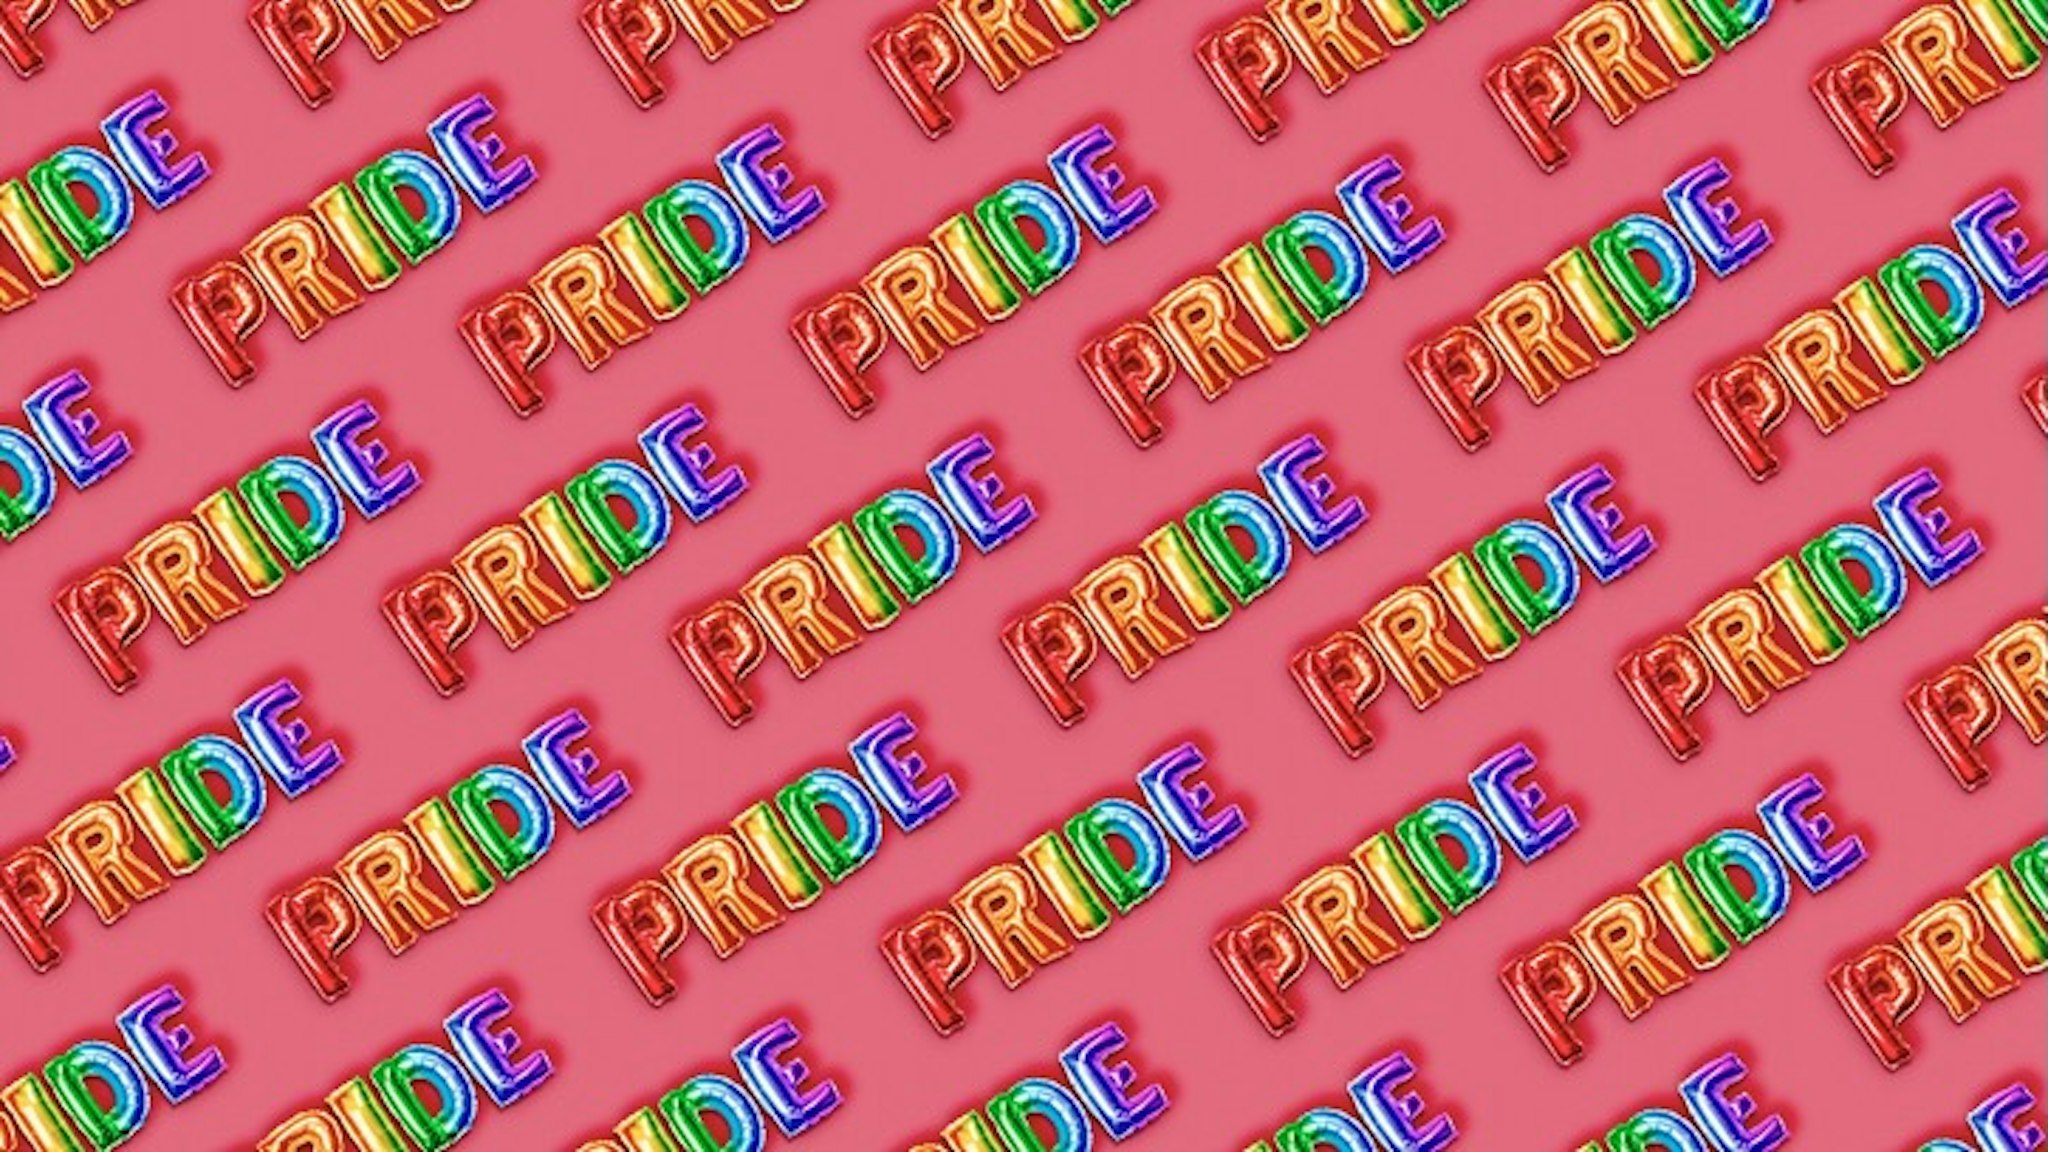 Gay PRIDE on pink - stock photo PRIDE gay text in rainbow letters balloons on pink background.Top view. retales botijero via Getty Images